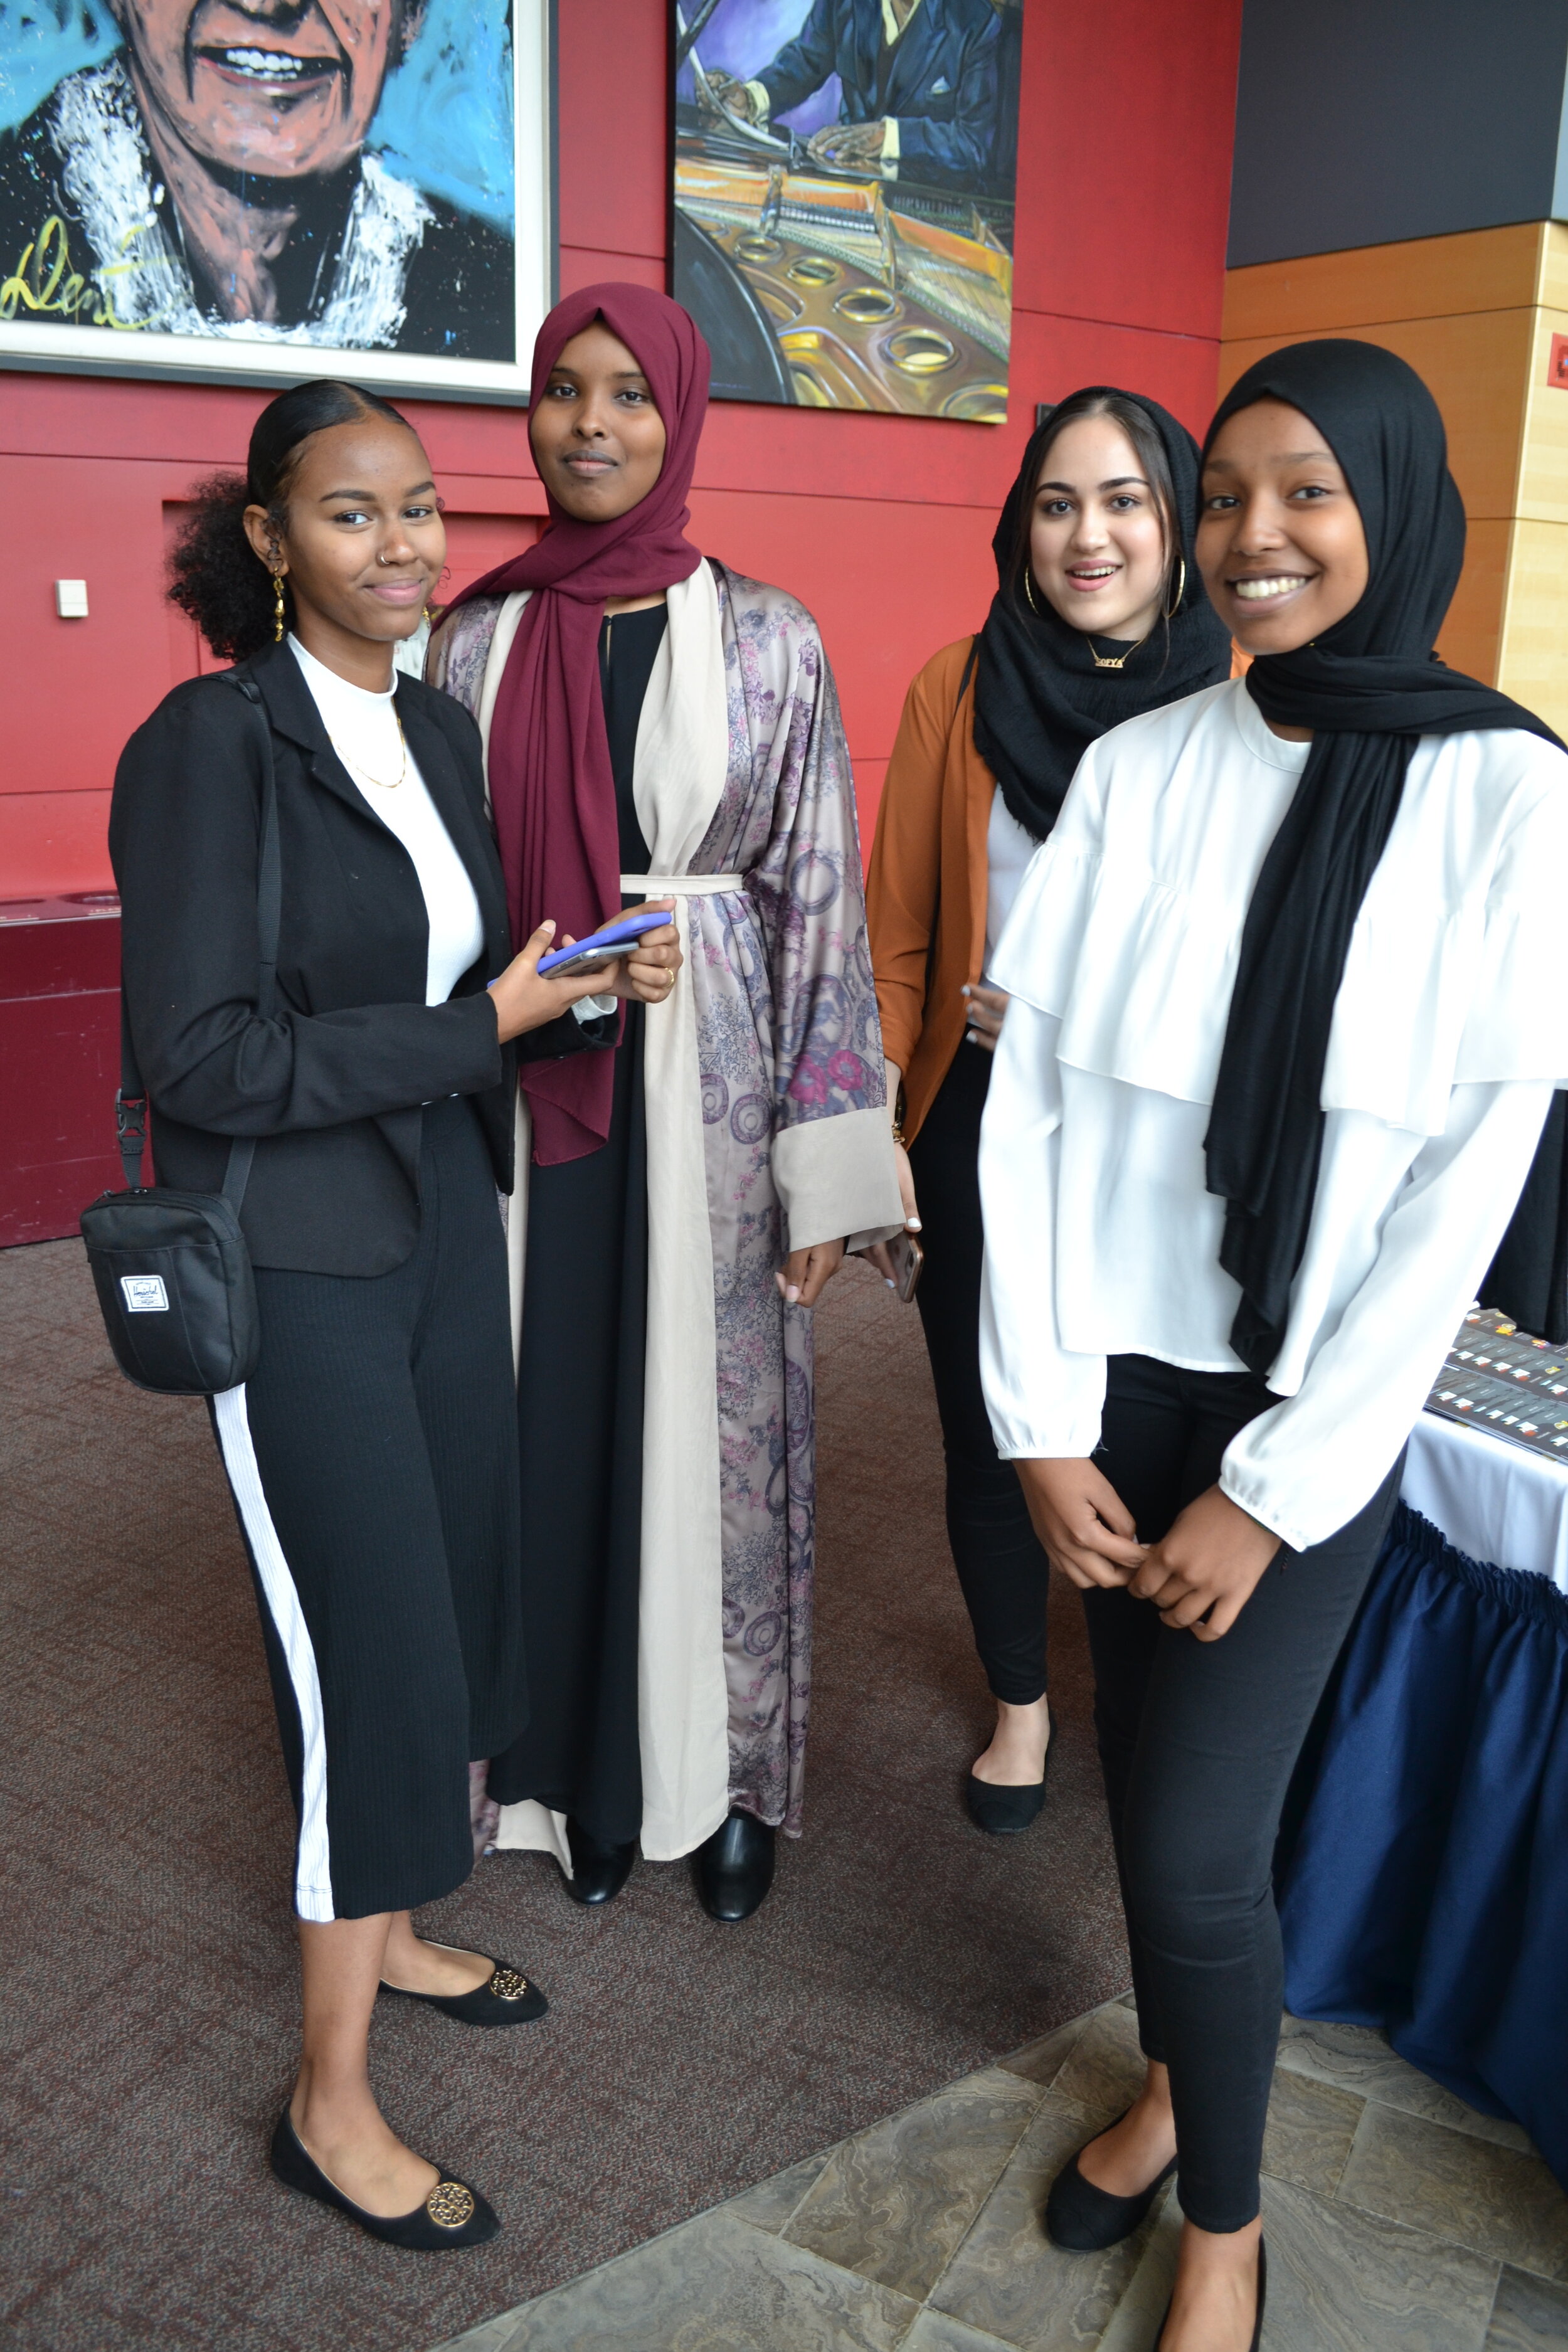  Ilhan and her fellow BridgeTO peers at the MAX Scholarship reception in September 